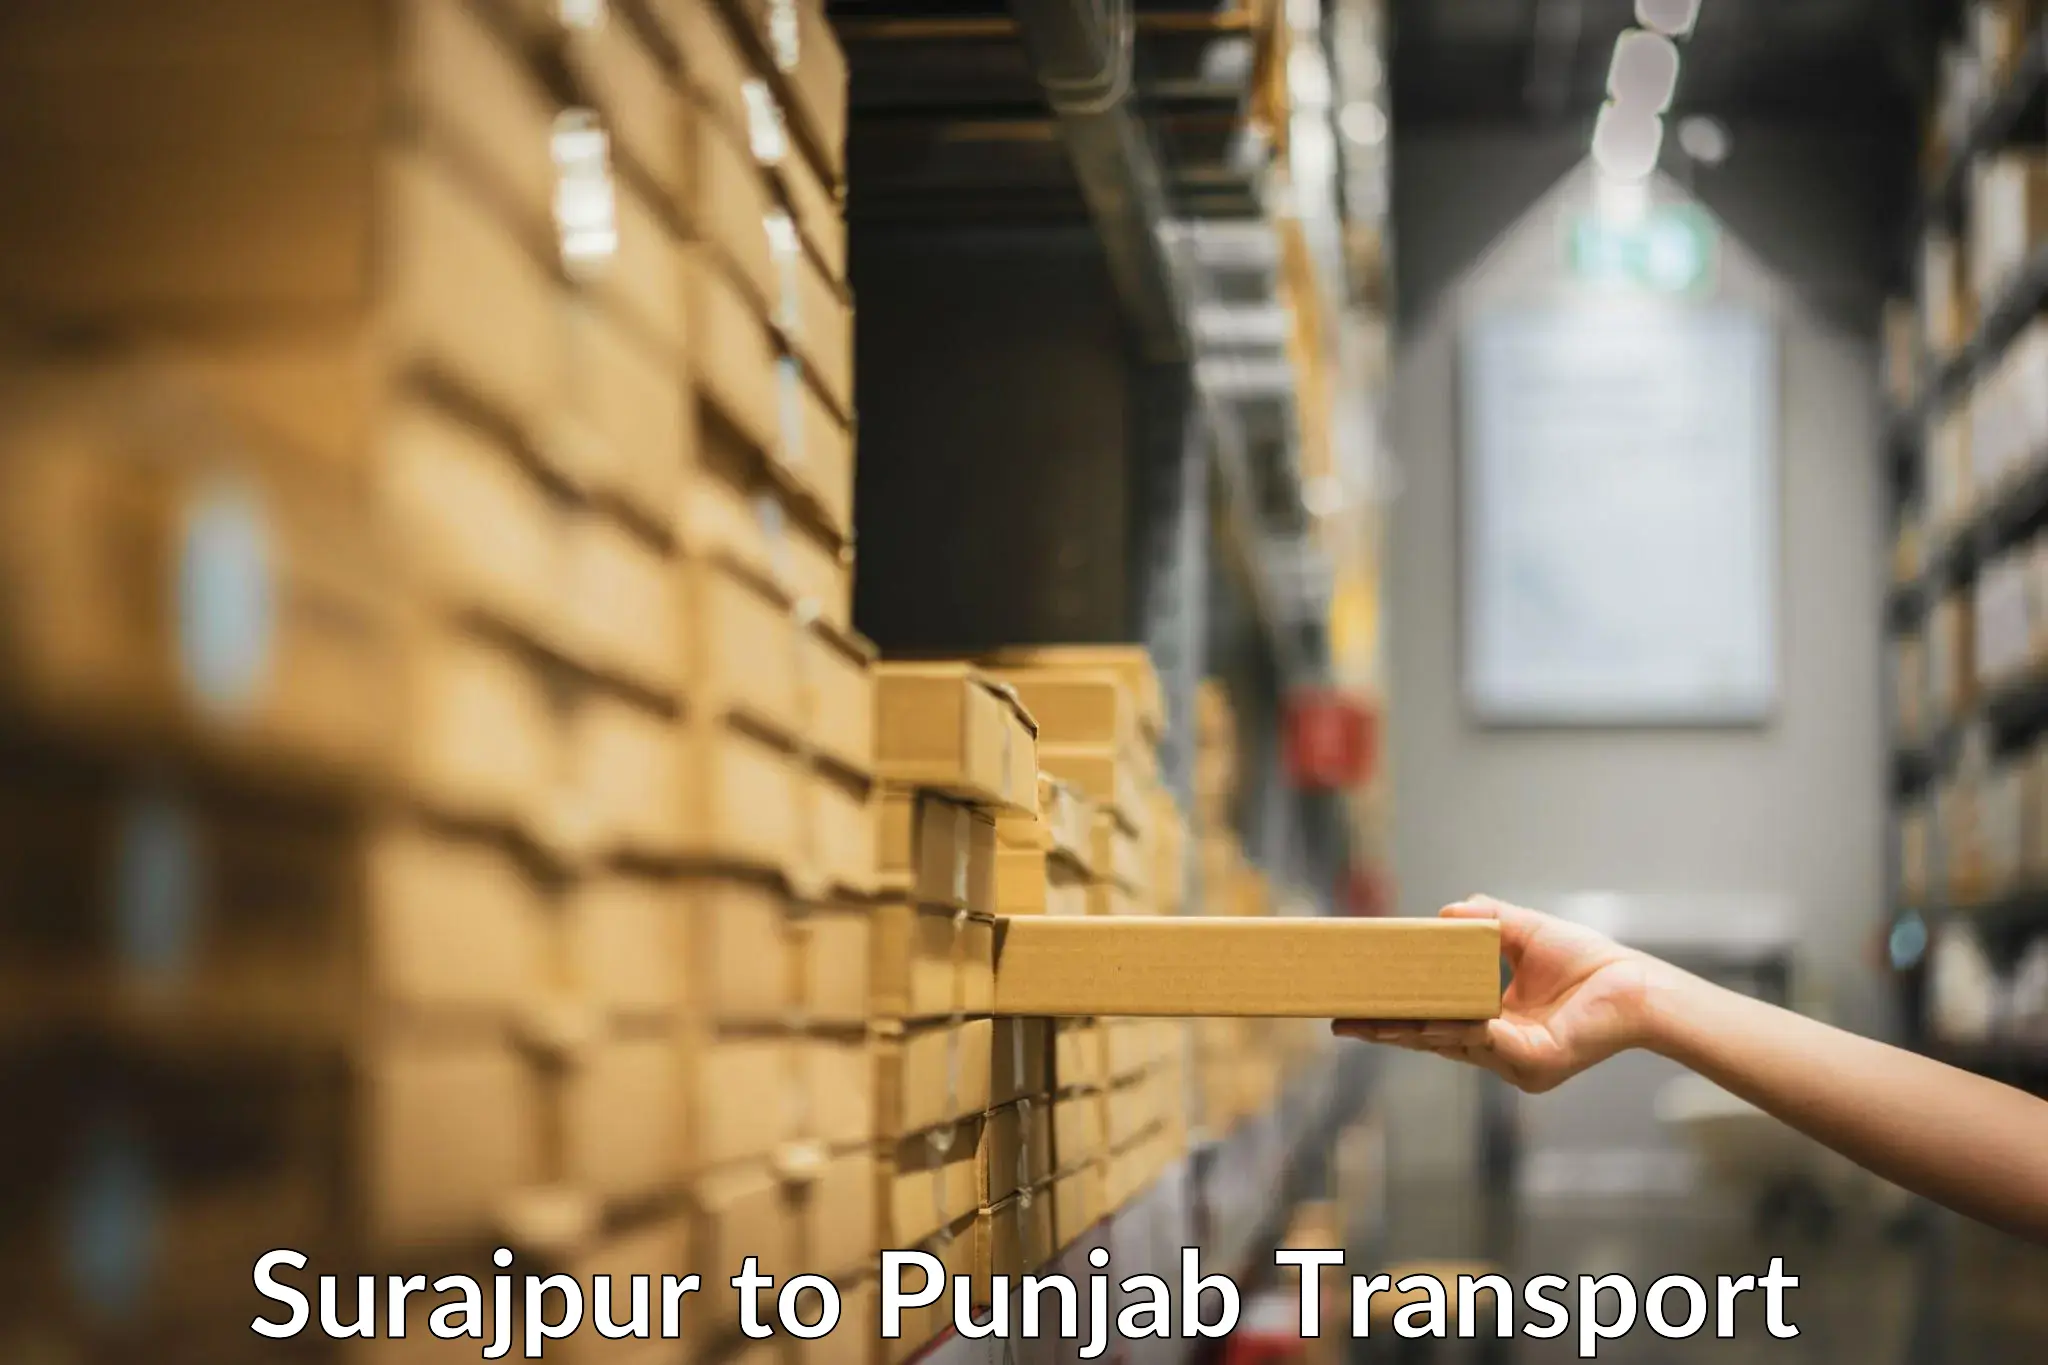 Transportation services Surajpur to Mohali